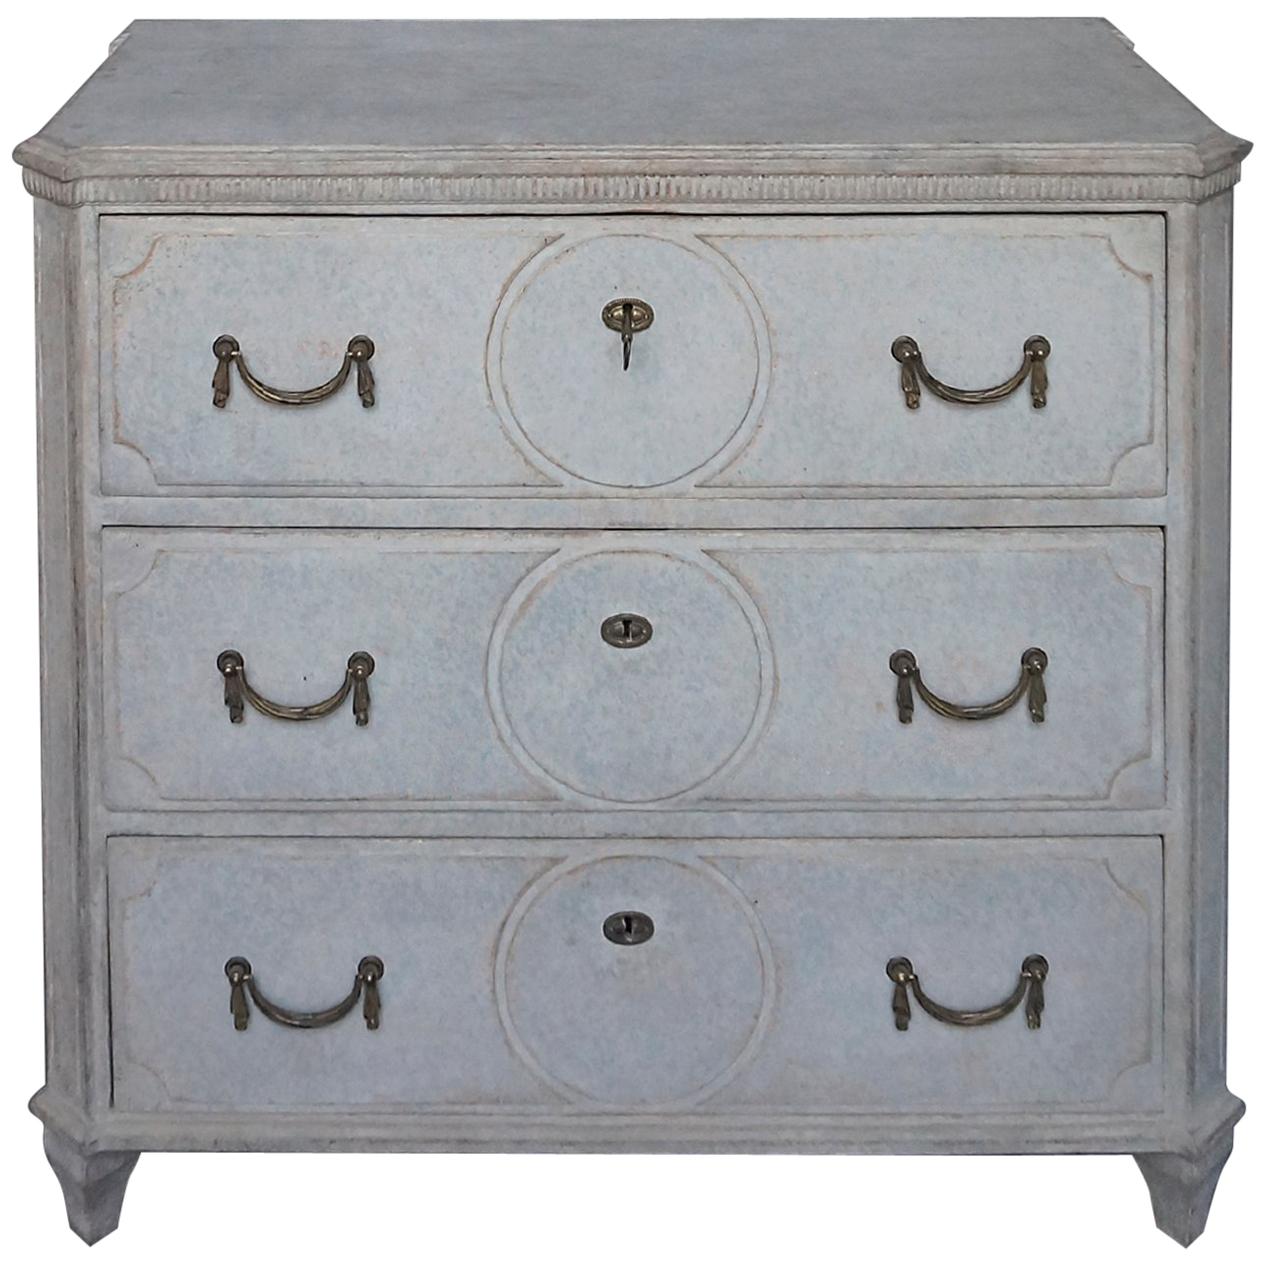 Neoclassical Style Chest of Drawers with Circular Detail